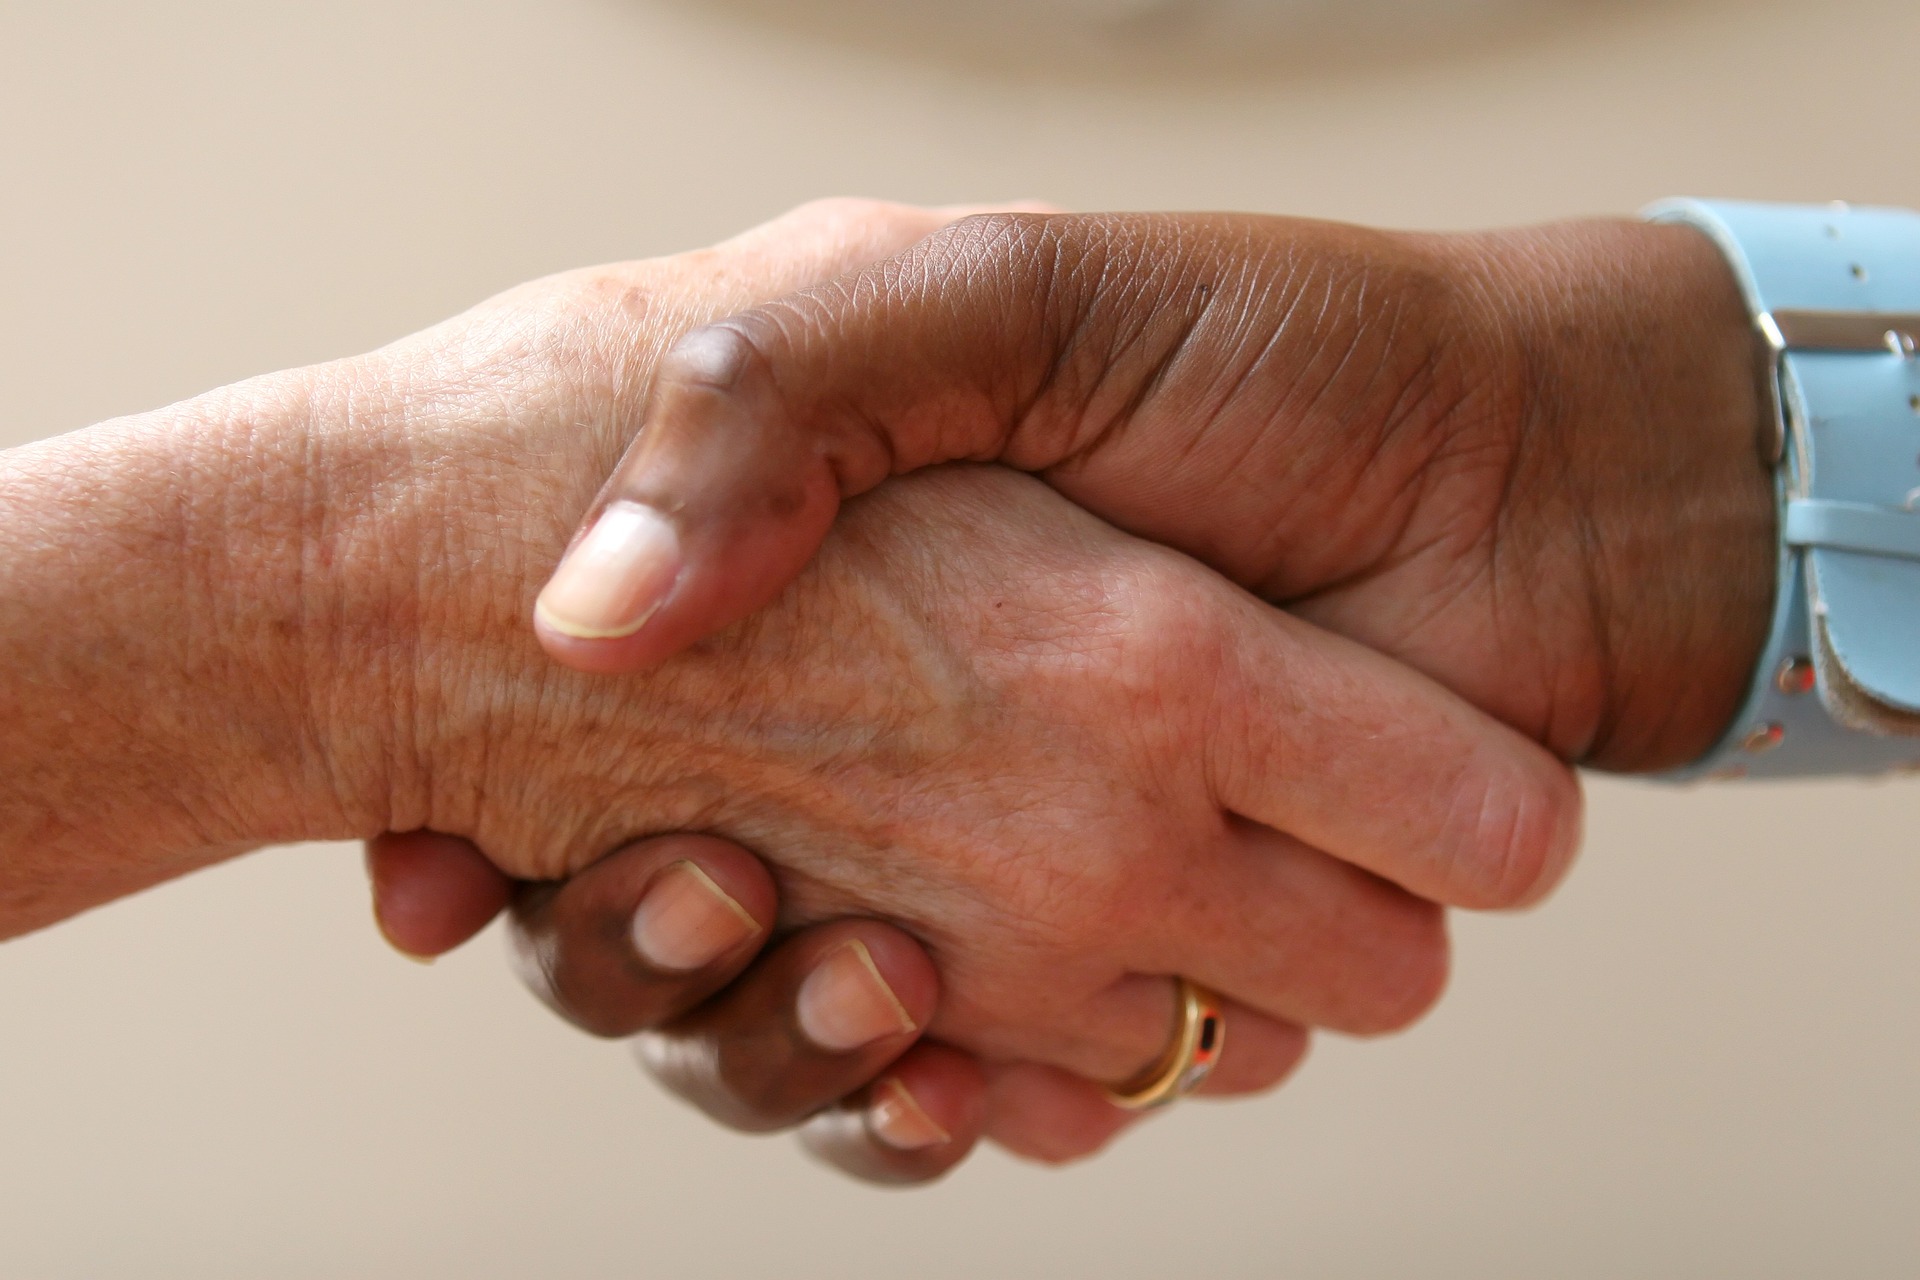 Close-up photograph of two people shaking hands.